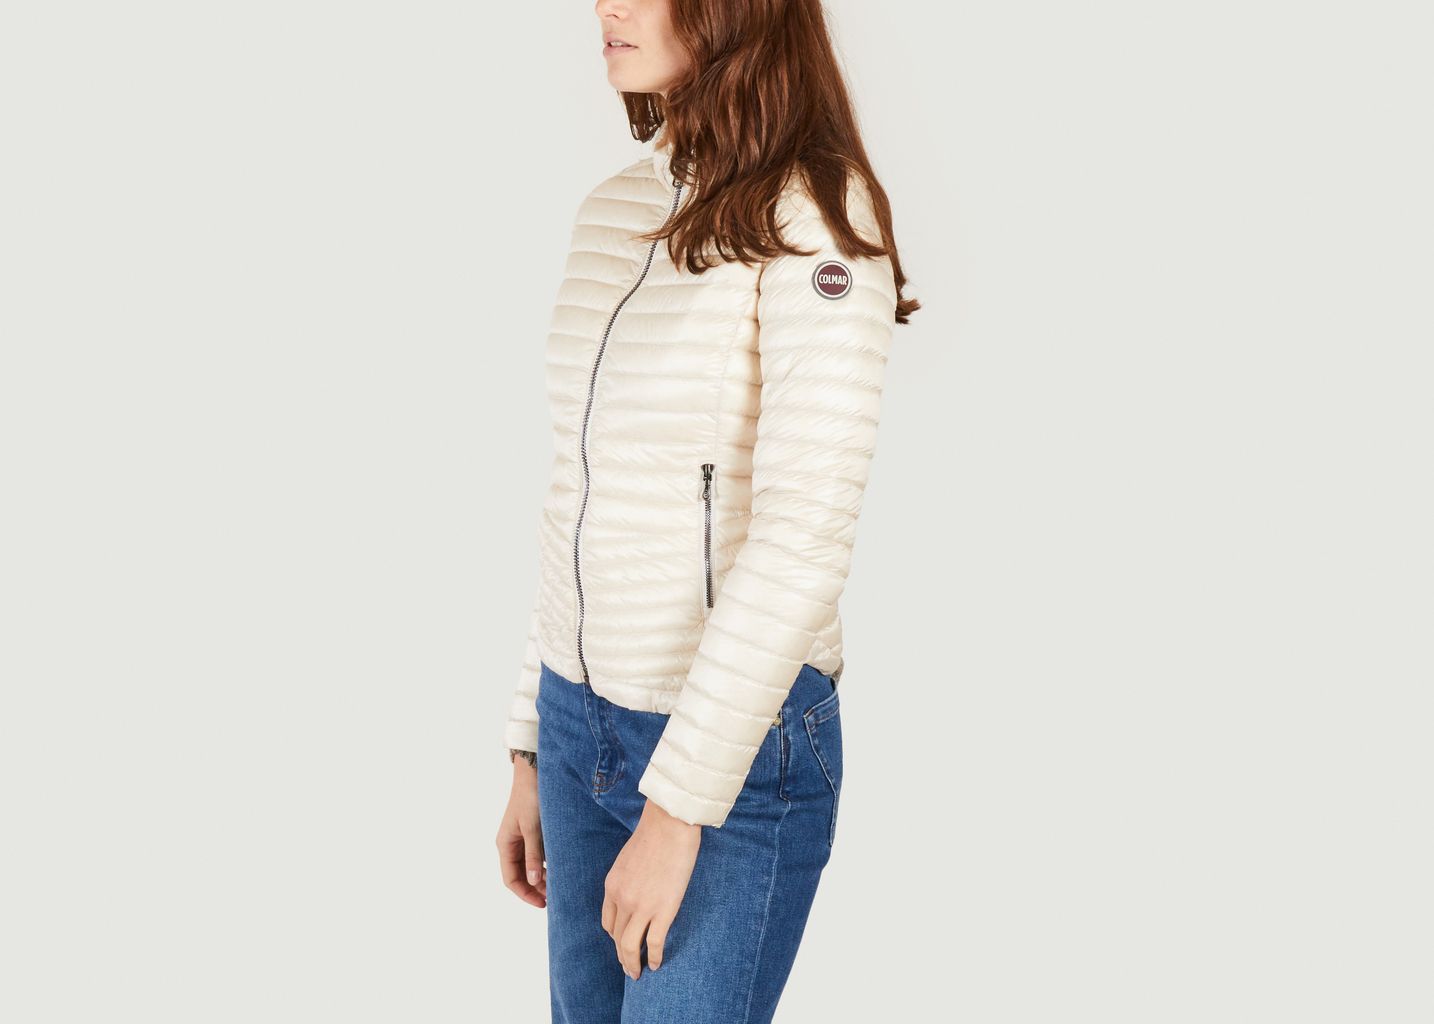 Quilted down jacket - Colmar